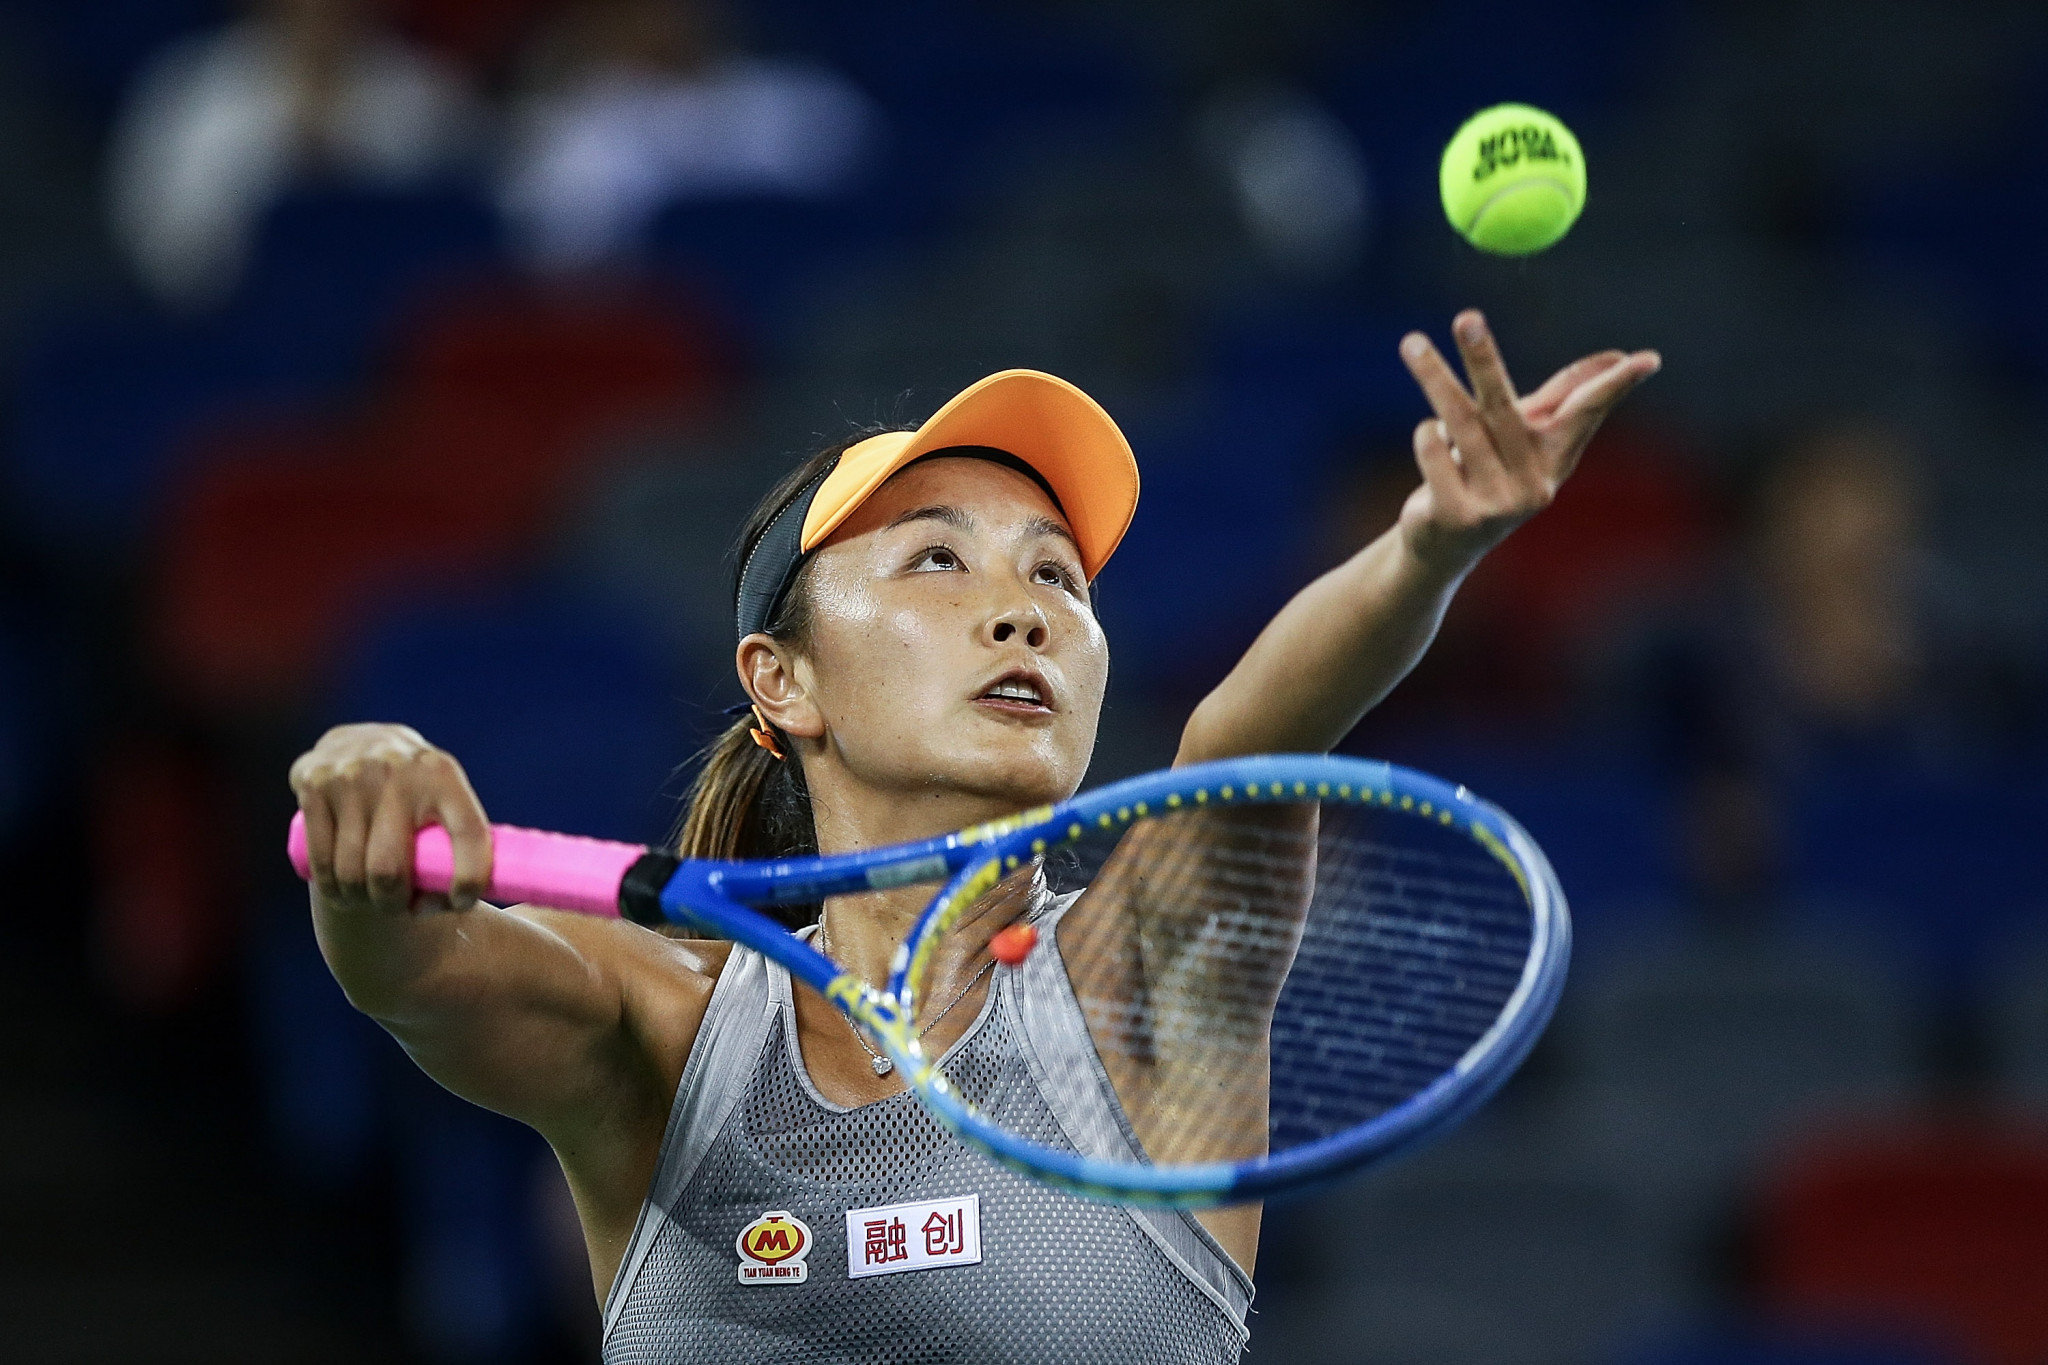 IOC doubles down on "quiet diplomacy" approach and insists it shares Peng Shuai concern